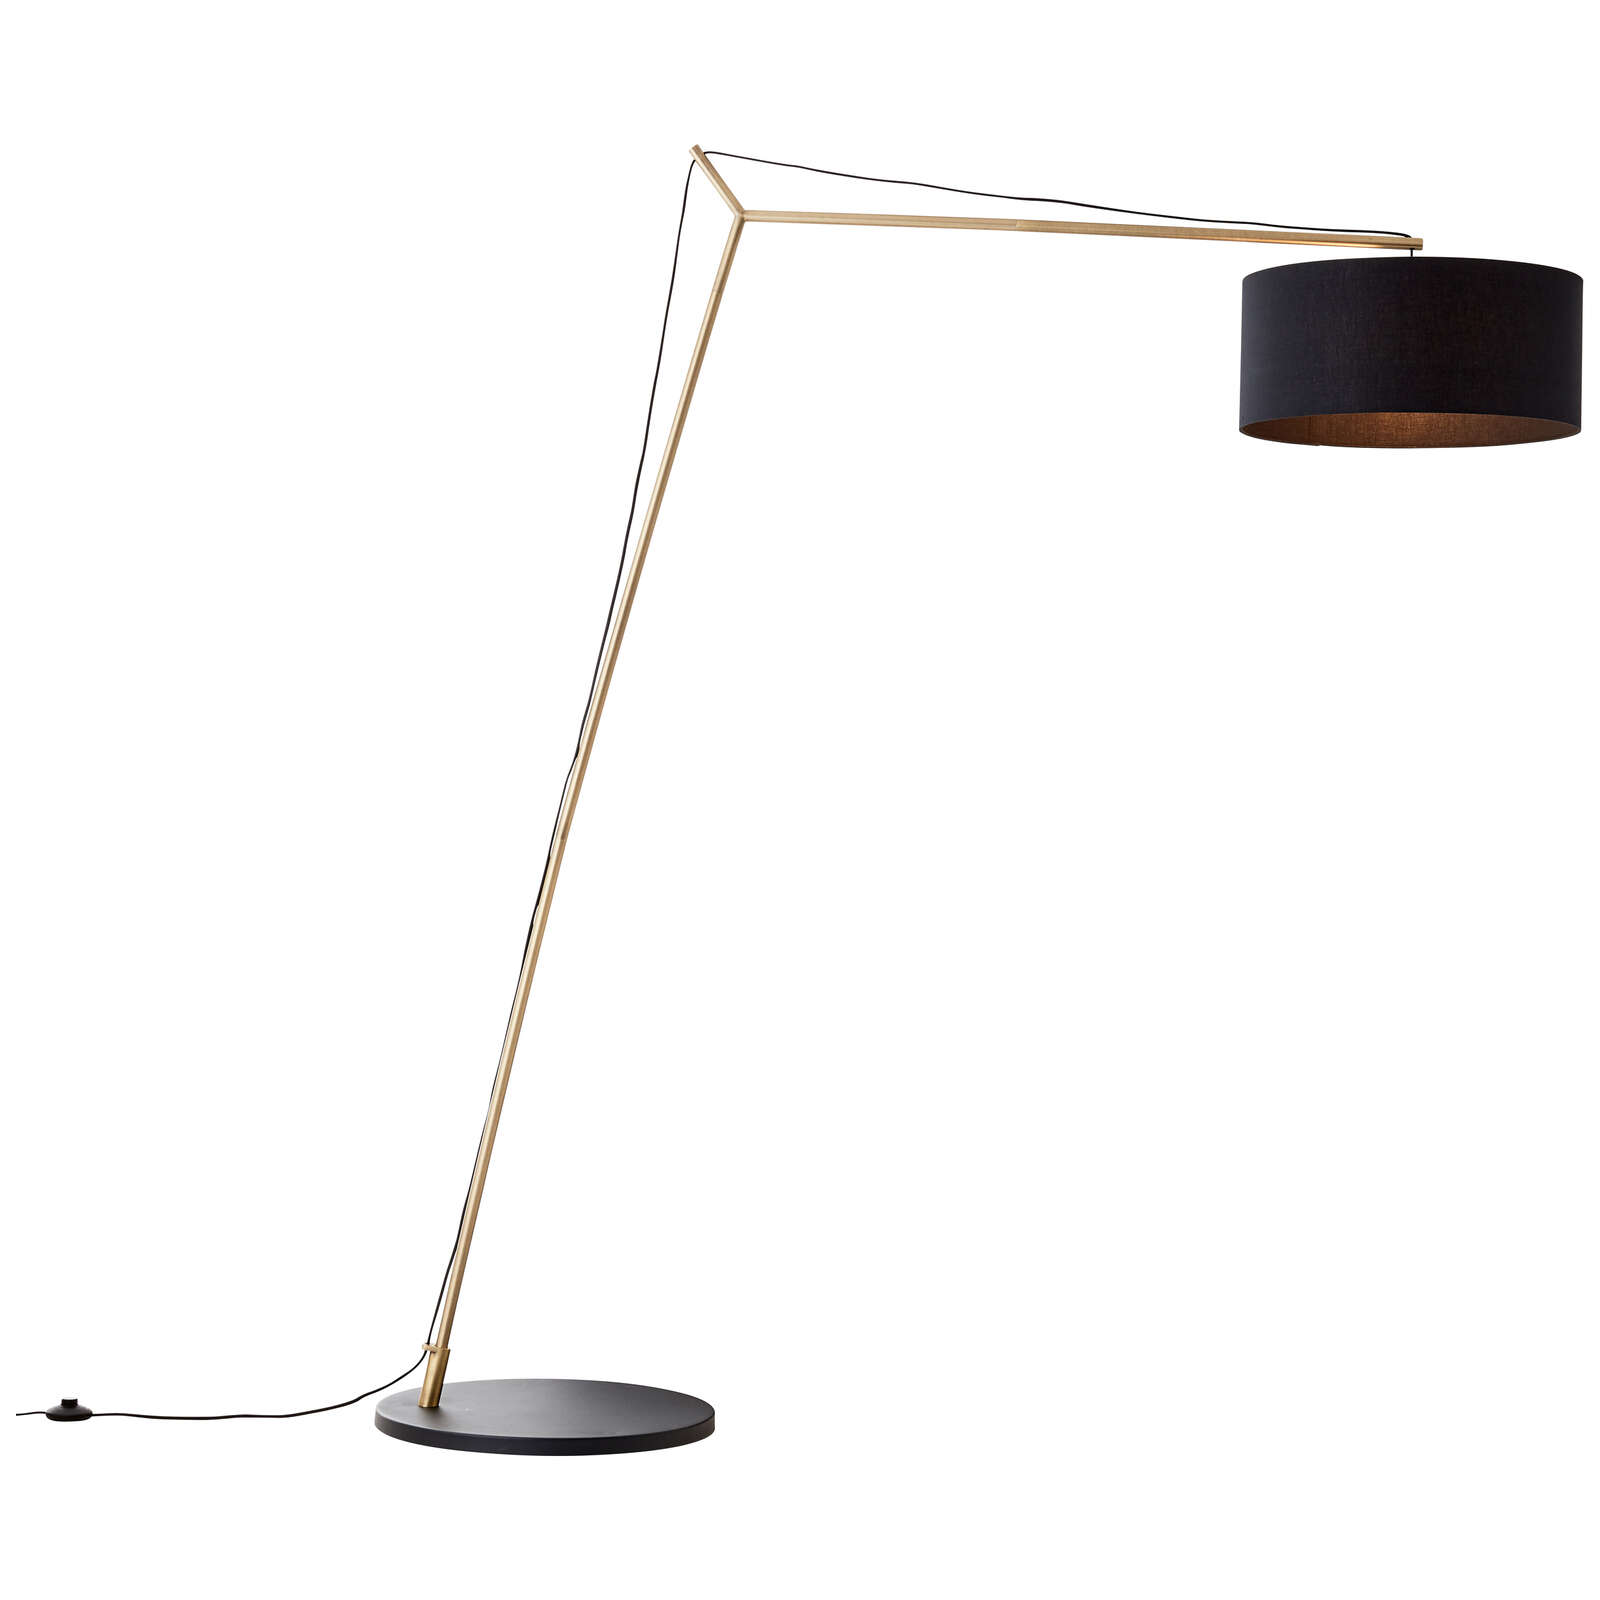             Arched textile floor lamp - Alisa 2 - Gold
        